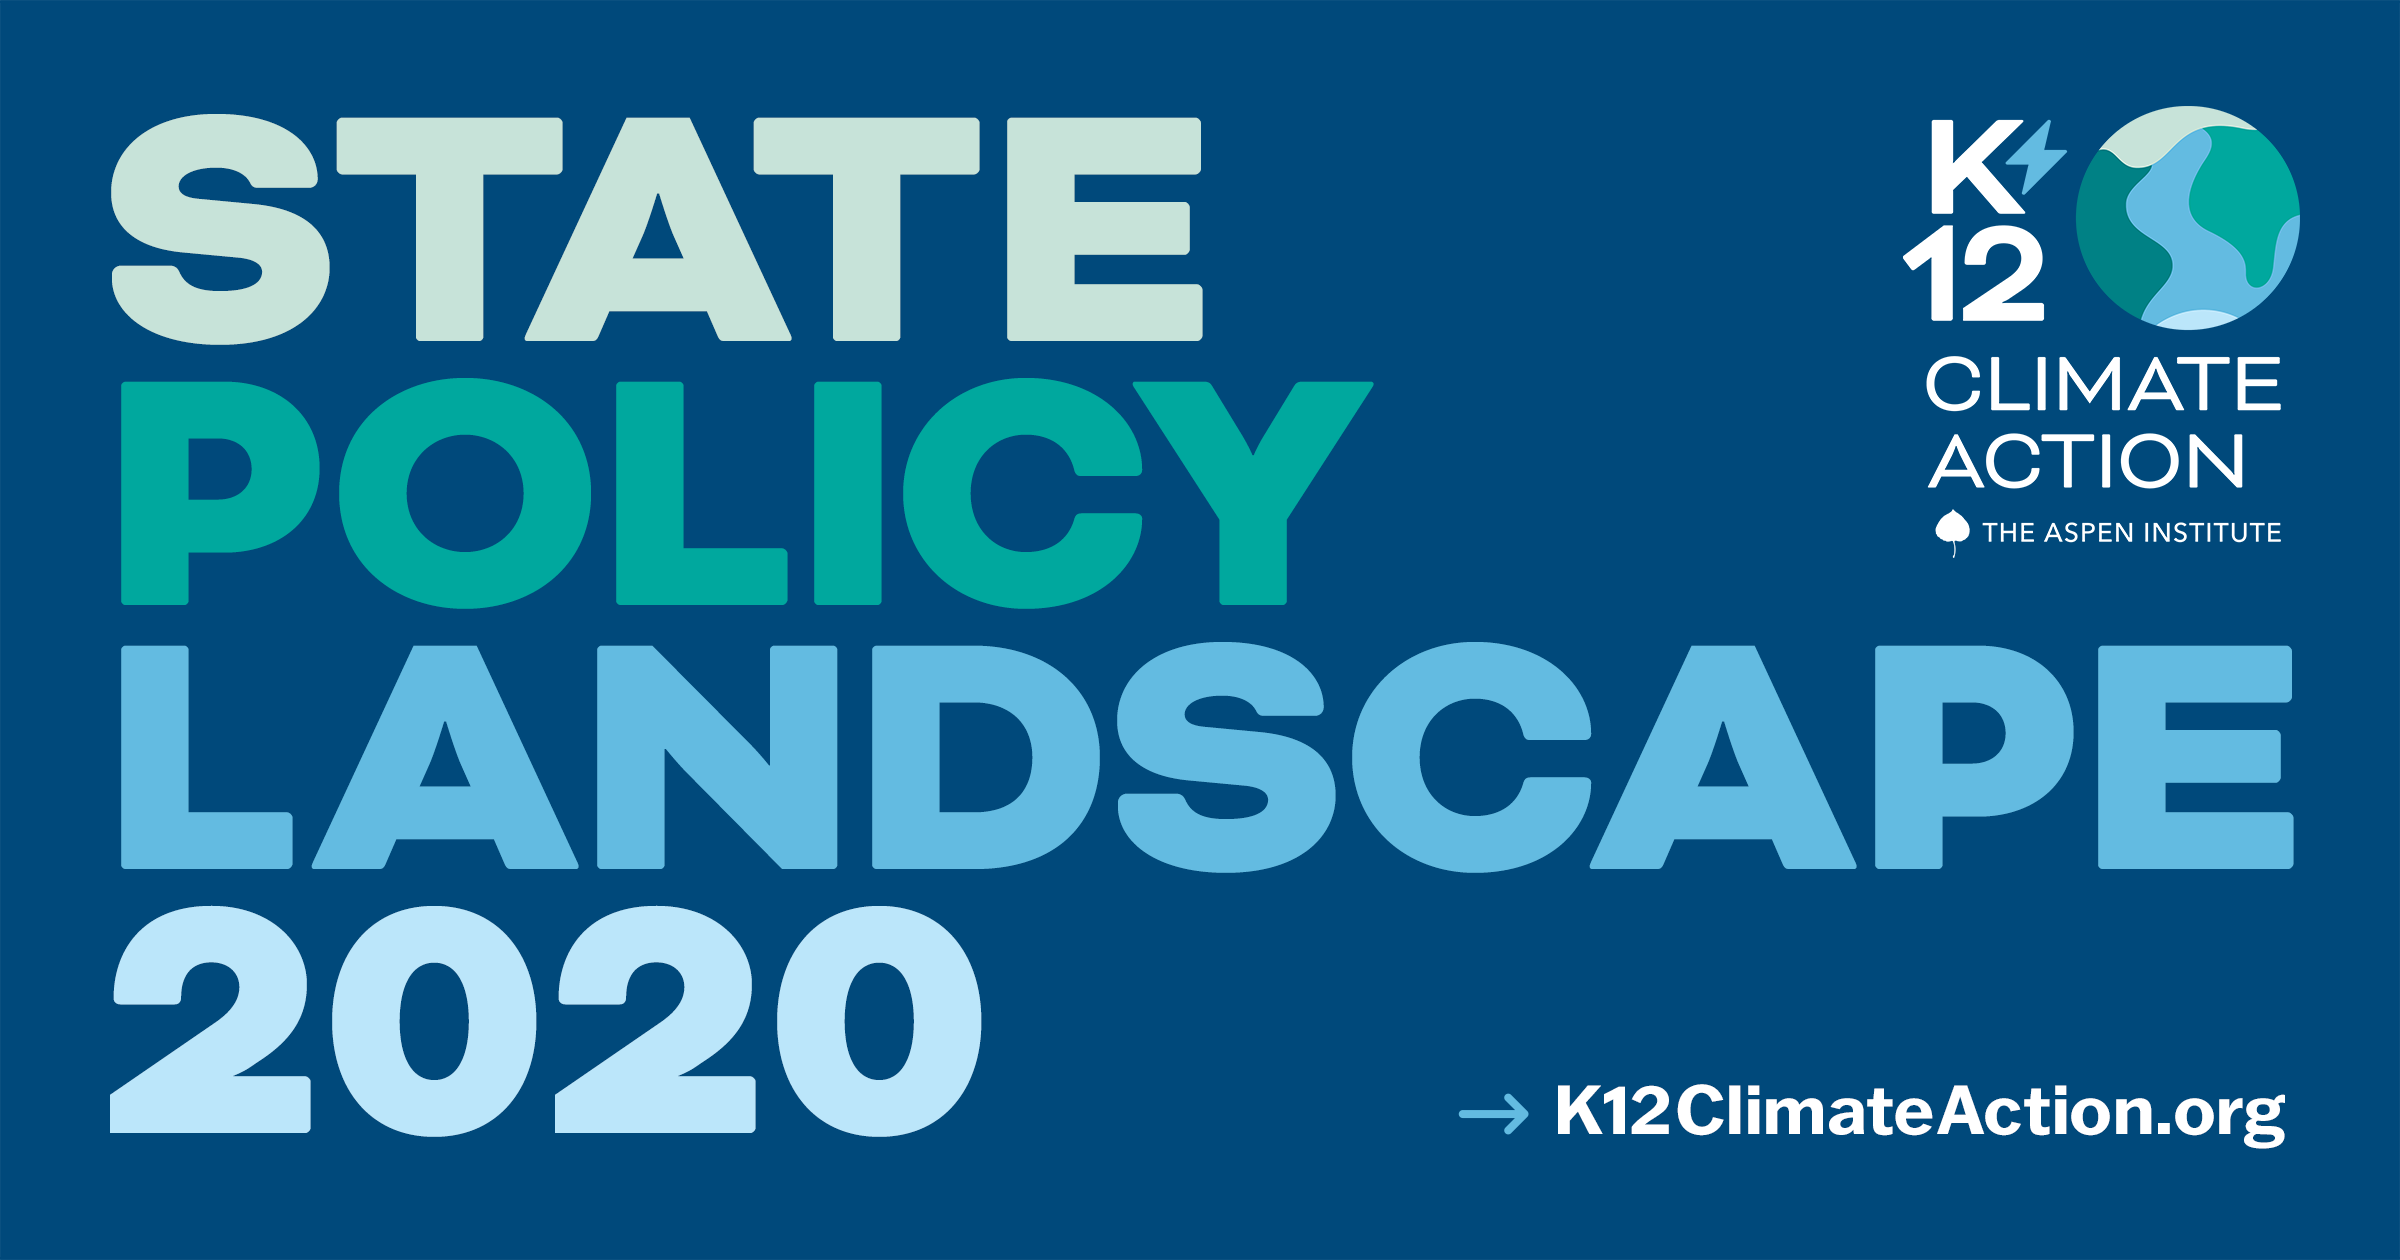 State Policy Landscape 2020